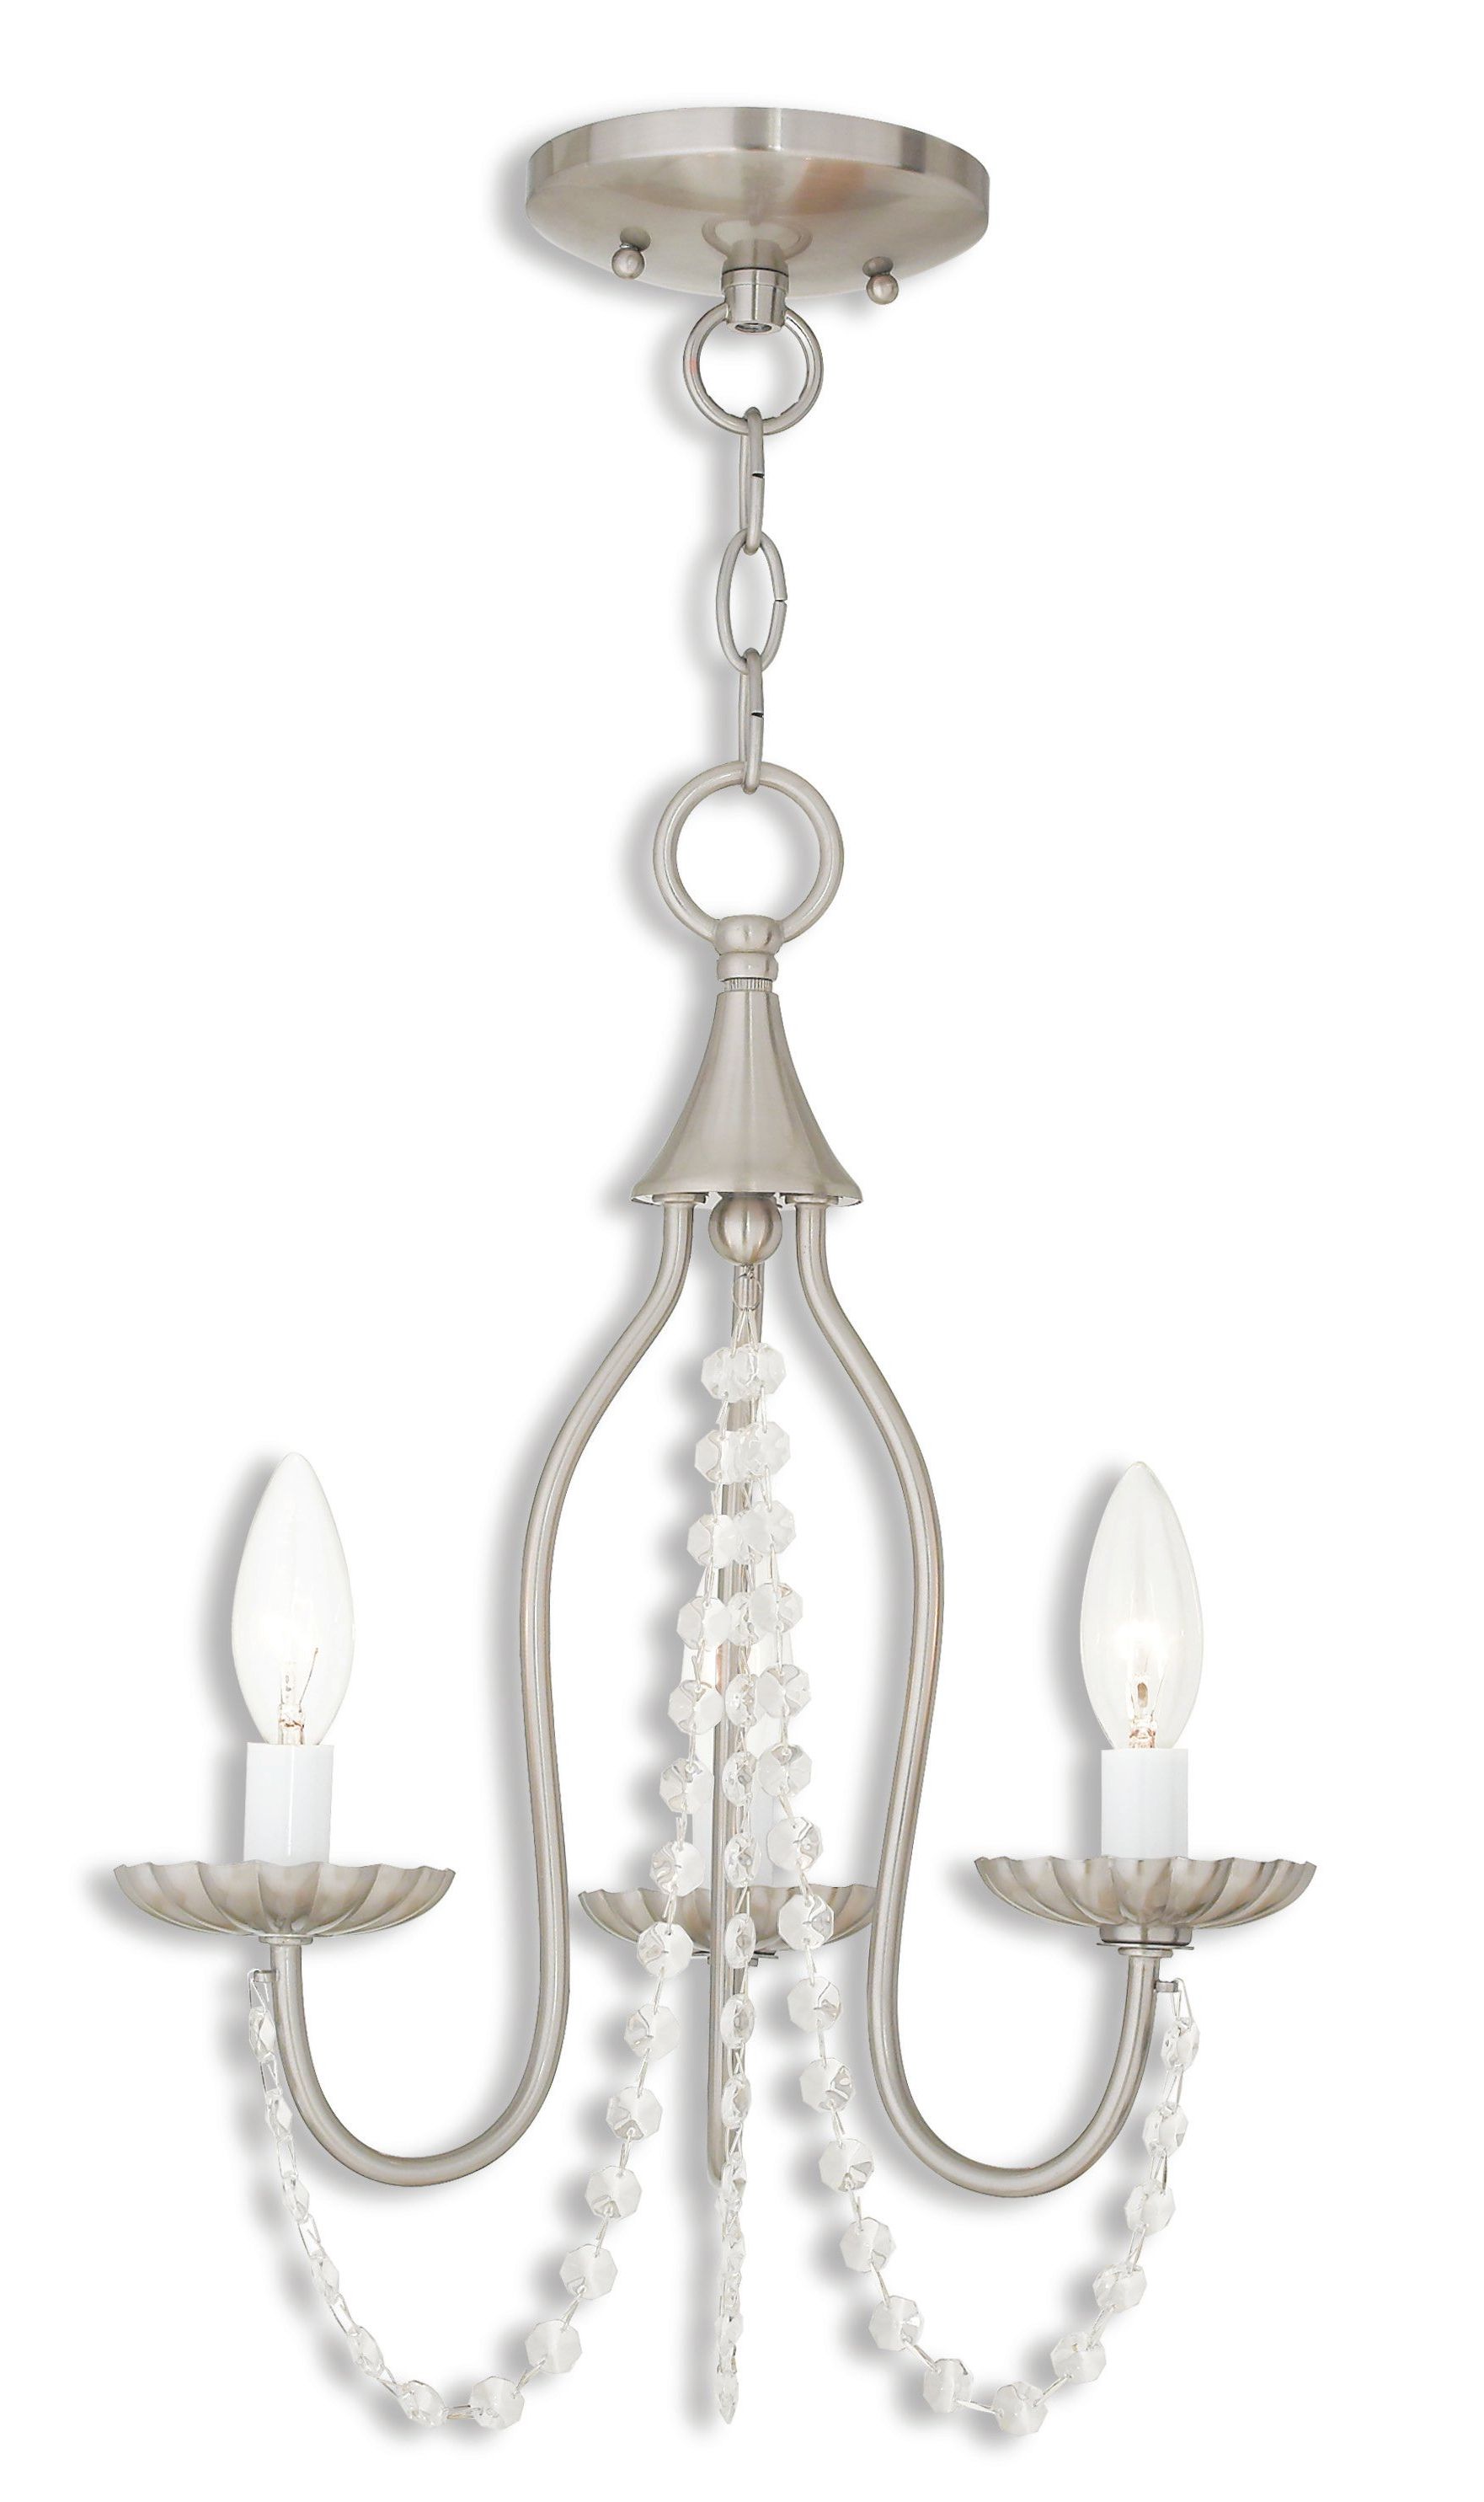 Latest Florentina 5 Light Candle Style Chandeliers Pertaining To Florentina 3 Light Candle Style Chandelier (View 10 of 25)